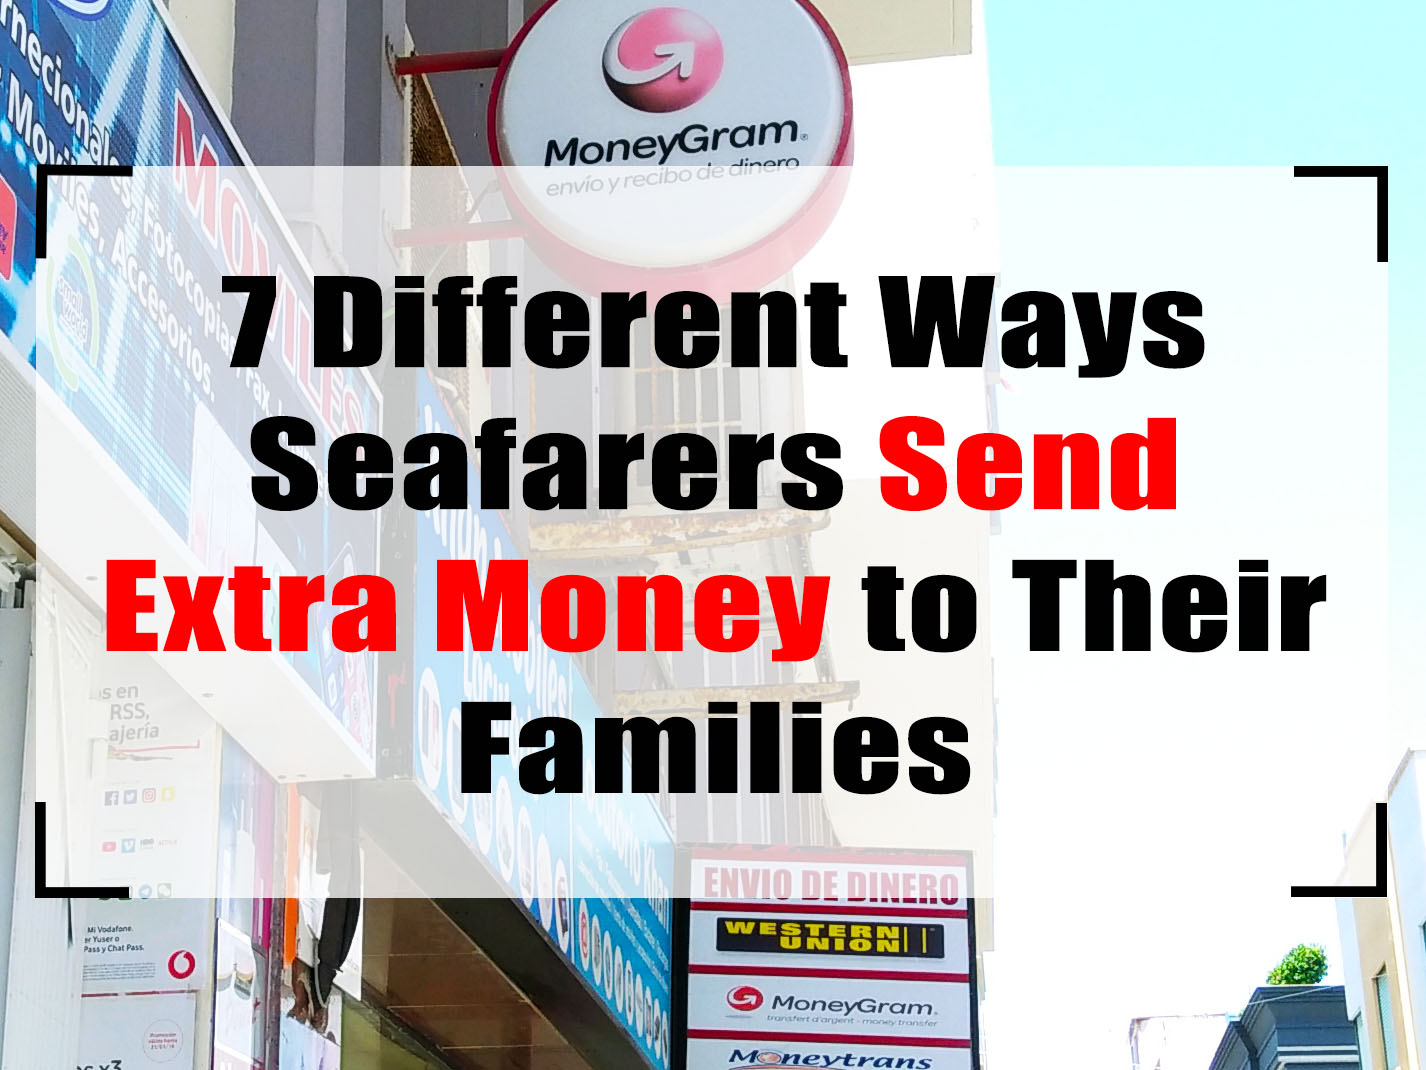 7 Different Ways Seaferers Send Extra Money to Their Families